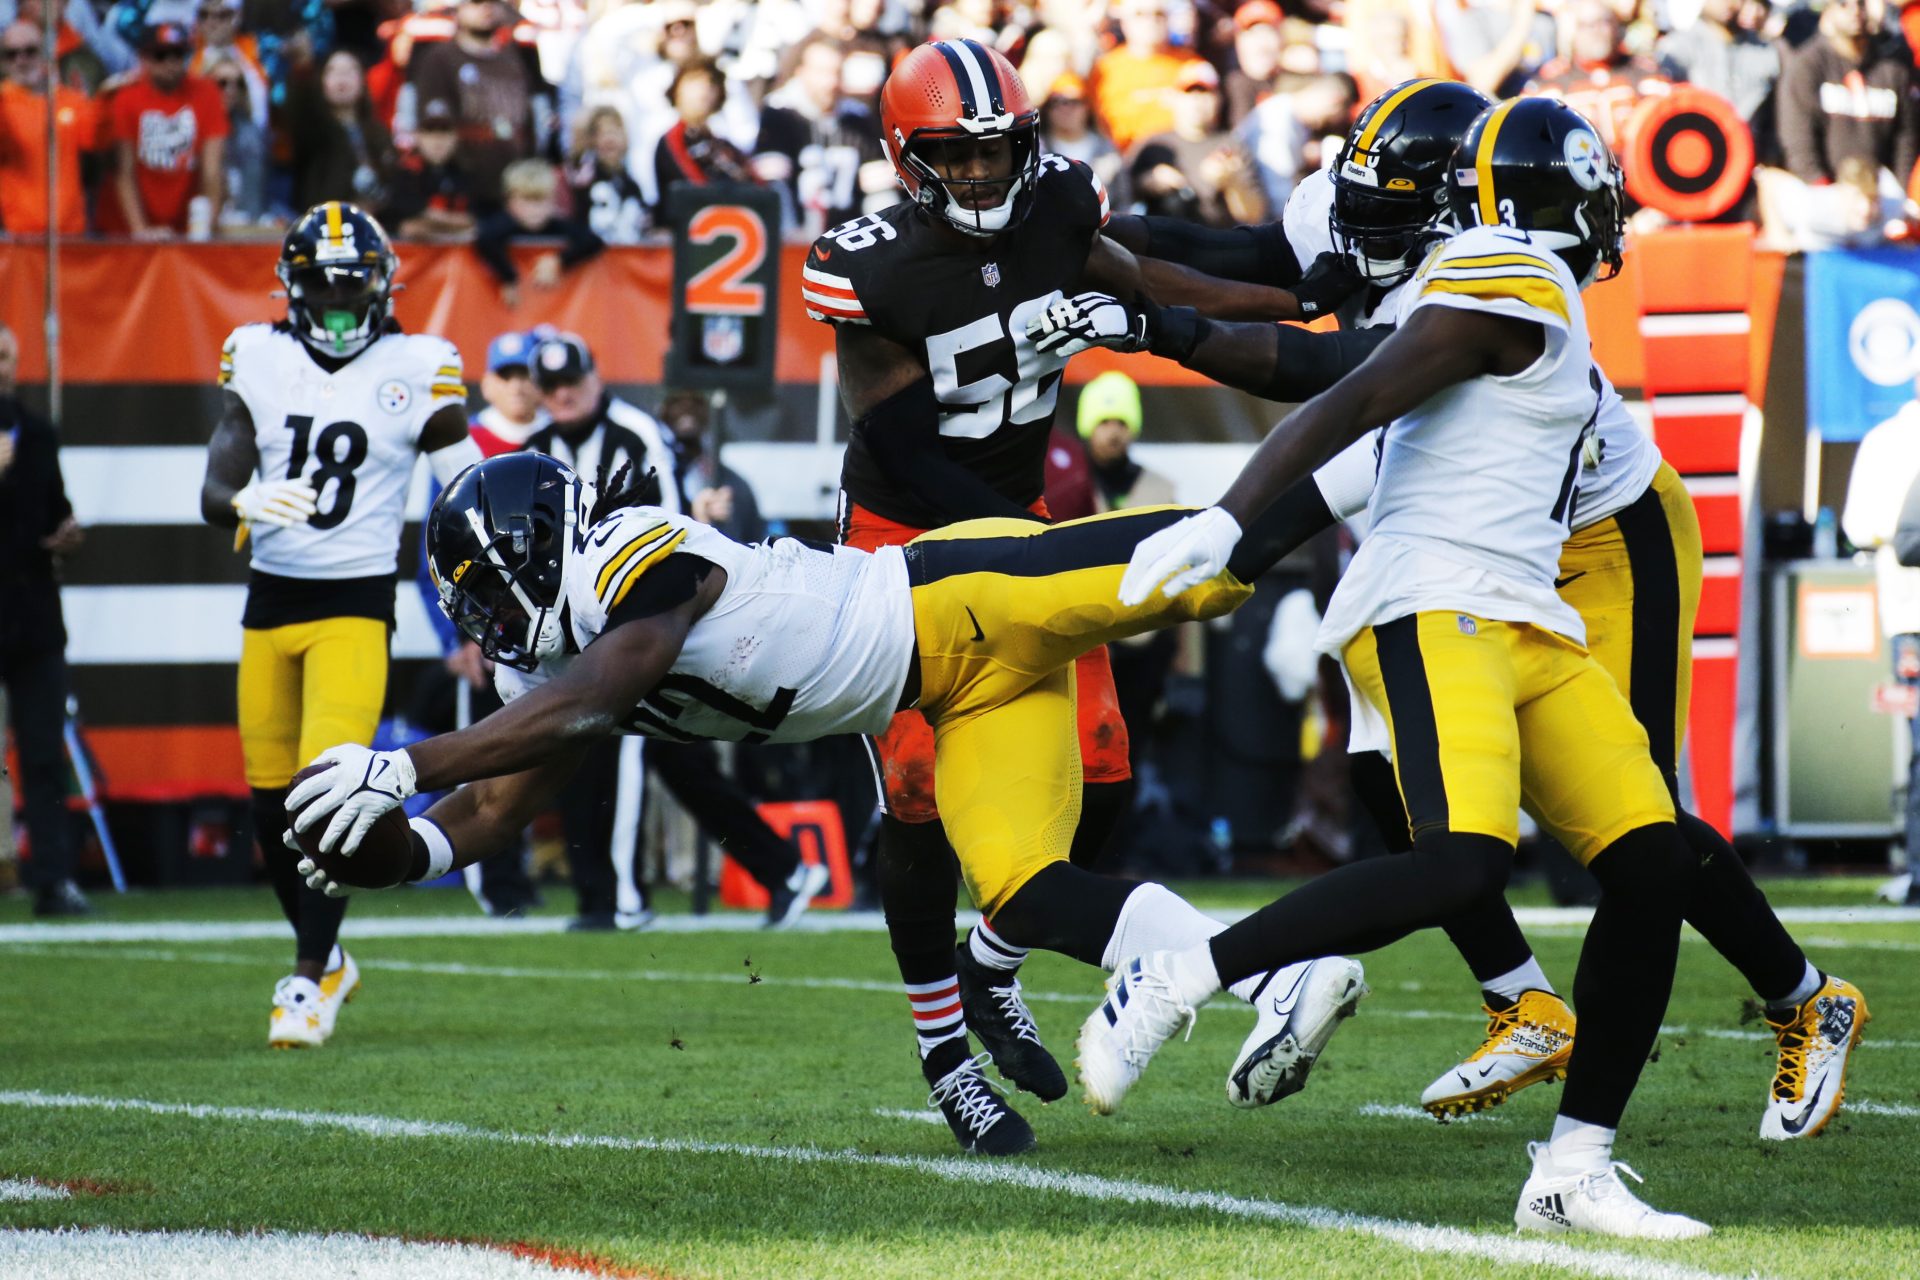 Pittsburgh Steelers running back Najee Harris (22) dives into the end zone for an 8-yard touchdown during the second half of an NFL football game against the Cleveland Browns, Sunday, Oct. 31, 2021, in Cleveland.